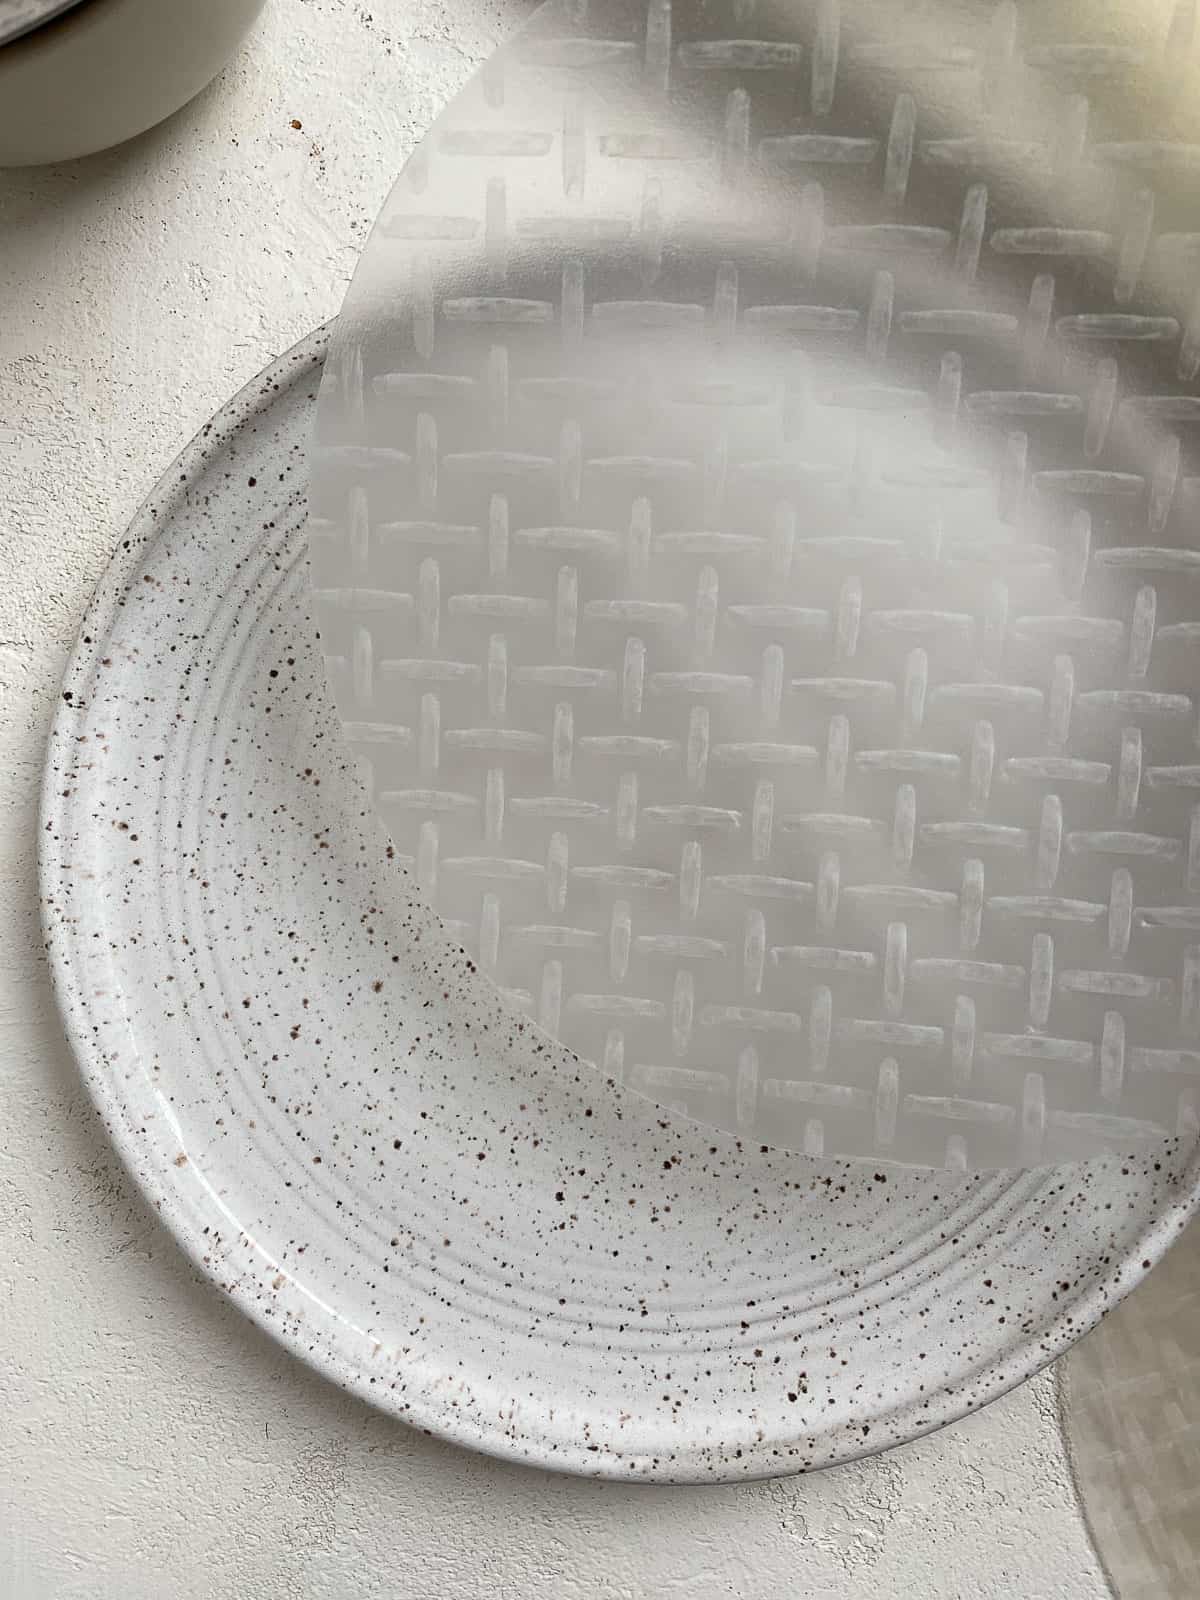 rice wrapper being dipped on top of a plate with water